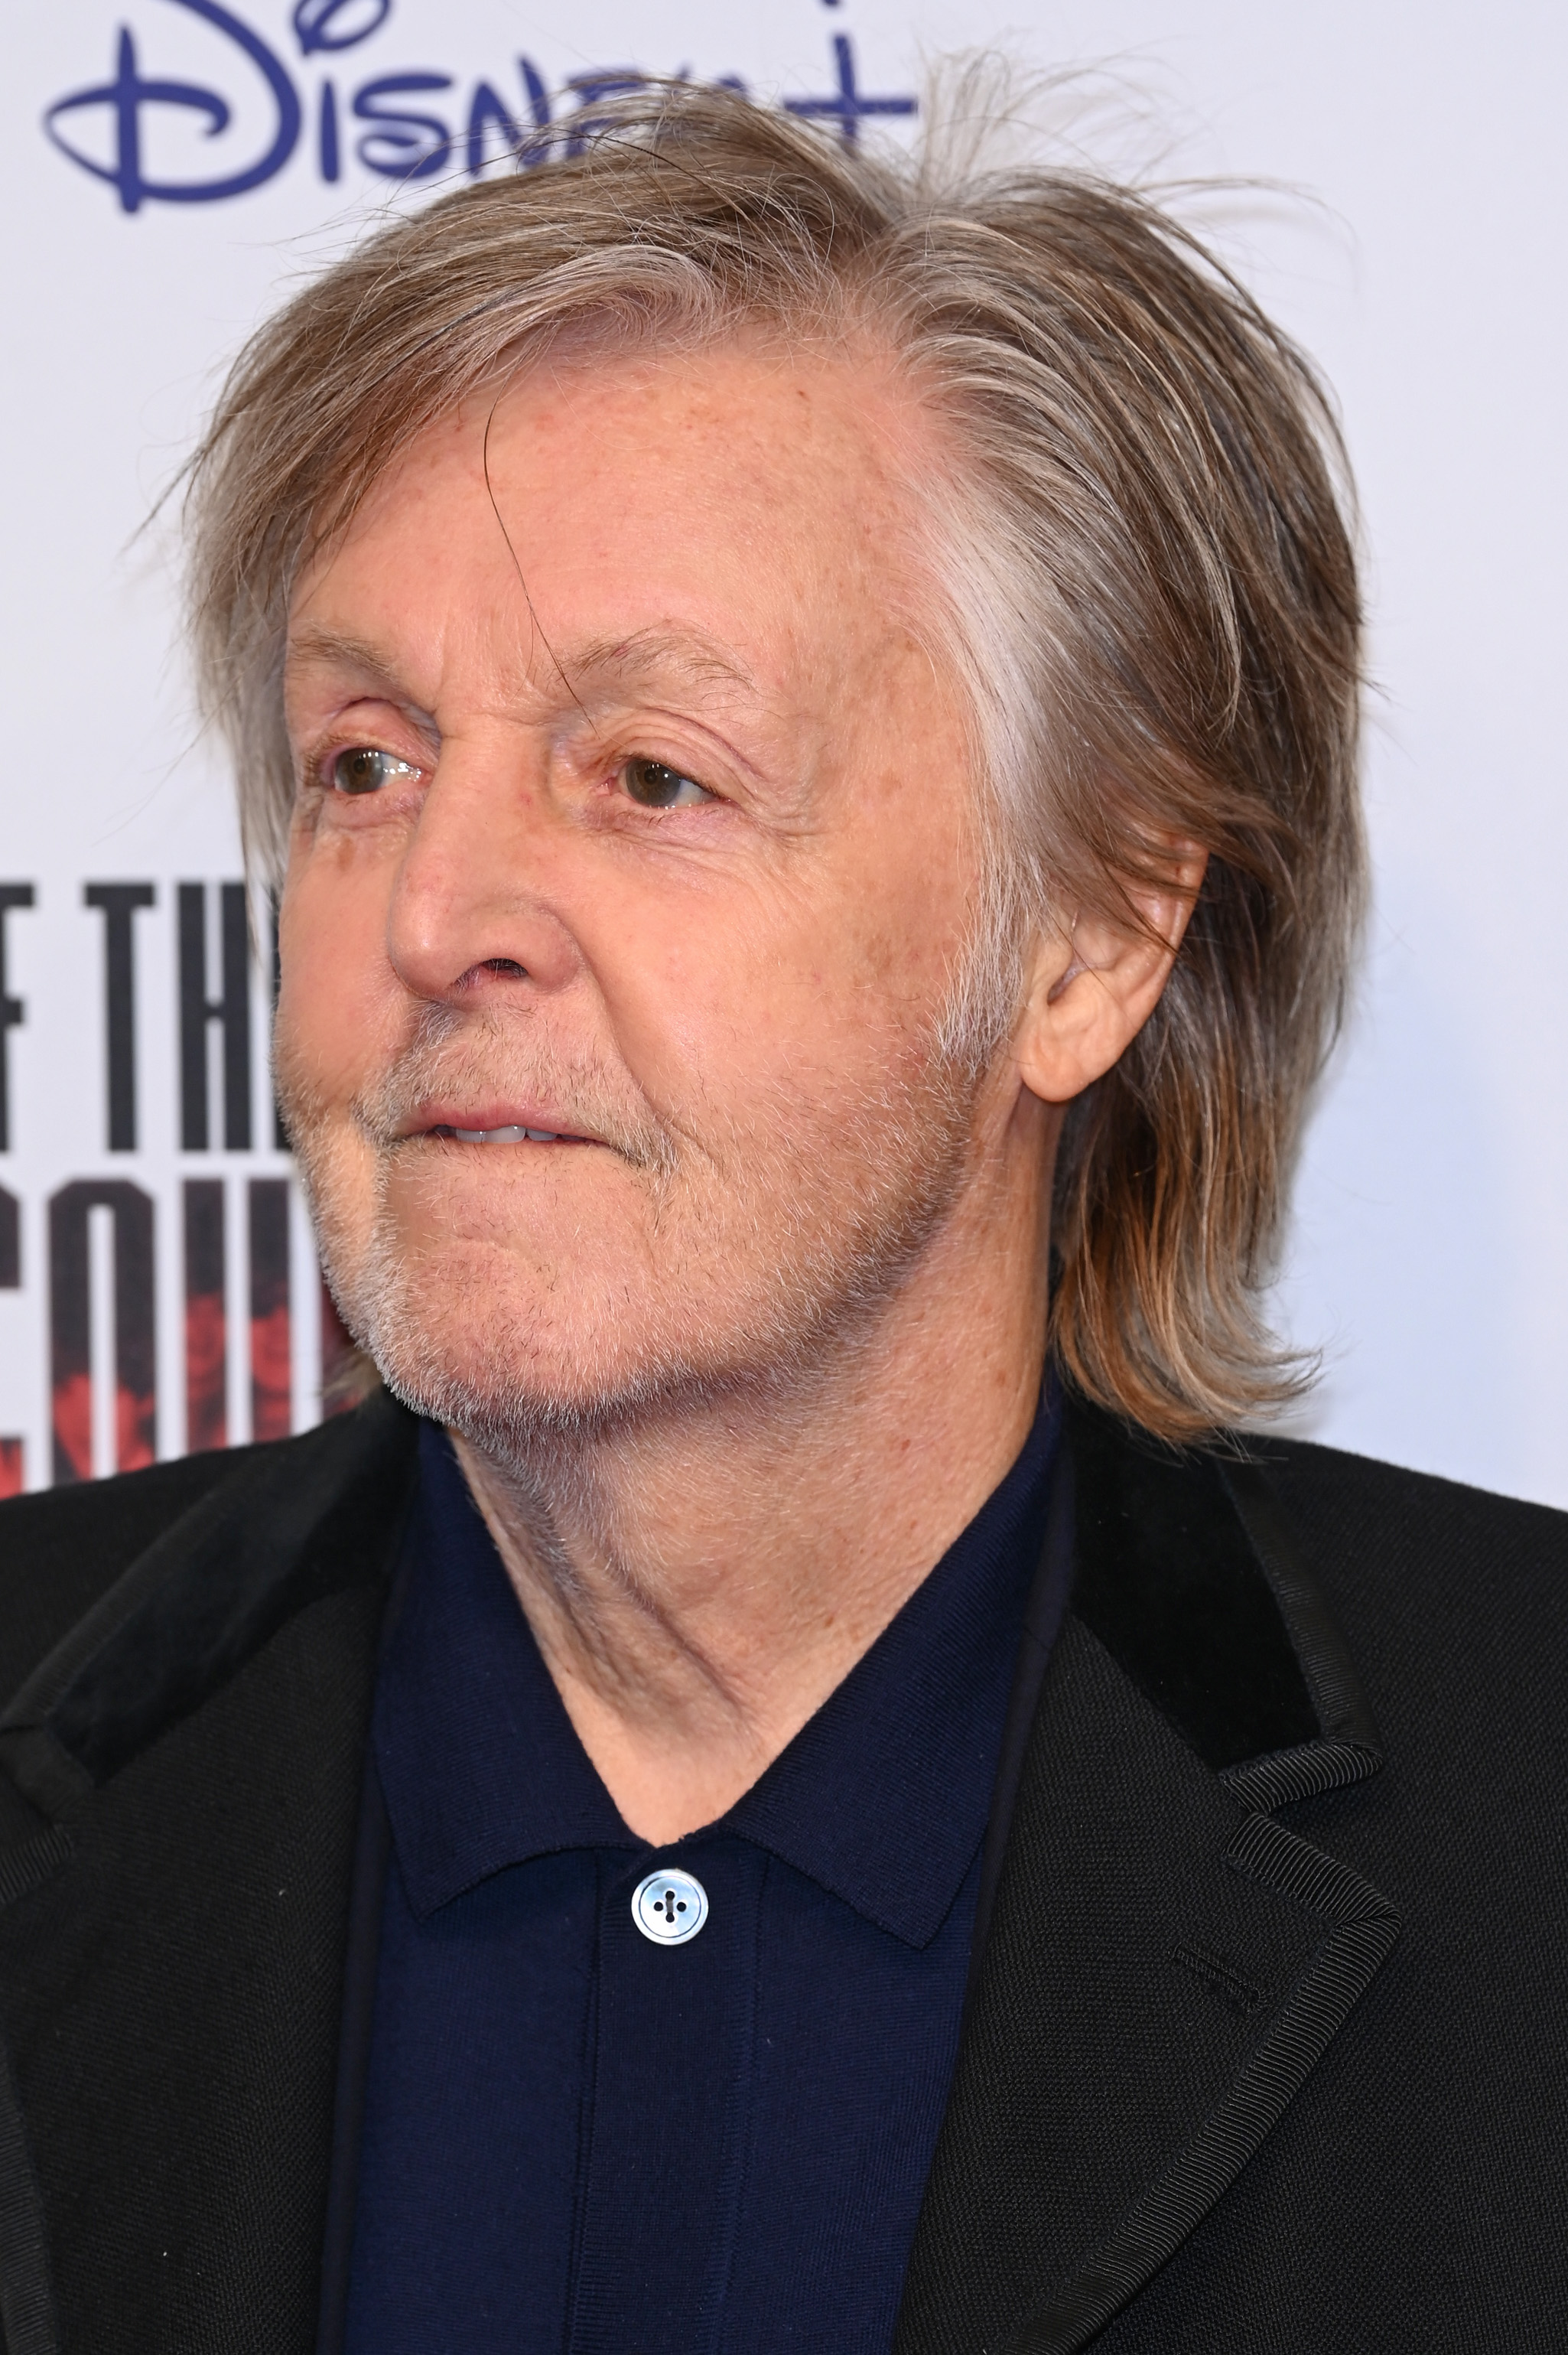 Paul McCartney attends the UK film premiere "If These Walls Could Sing" on December 12, 2022 in London, England | Source: Getty Images